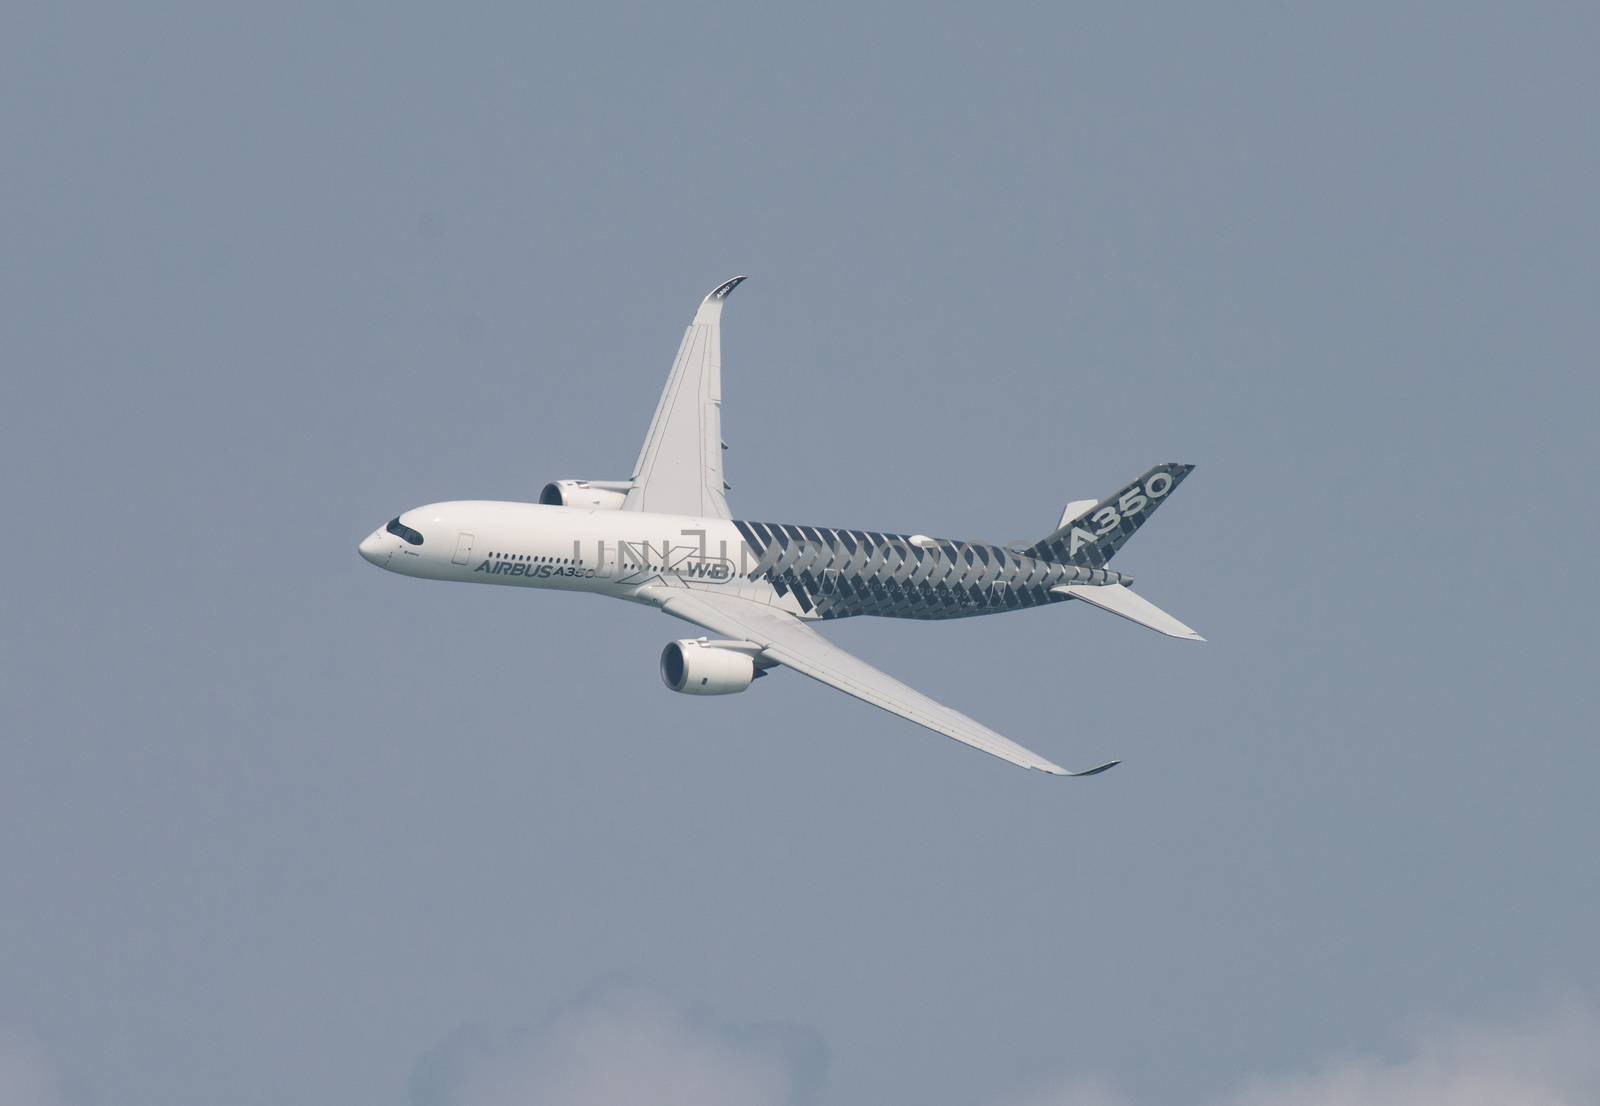 Singapore - February 14, 2016: Airbus A350 XWB during it’s performance at Singapore Airshow at Changi Exhibition Centre in Singapore.